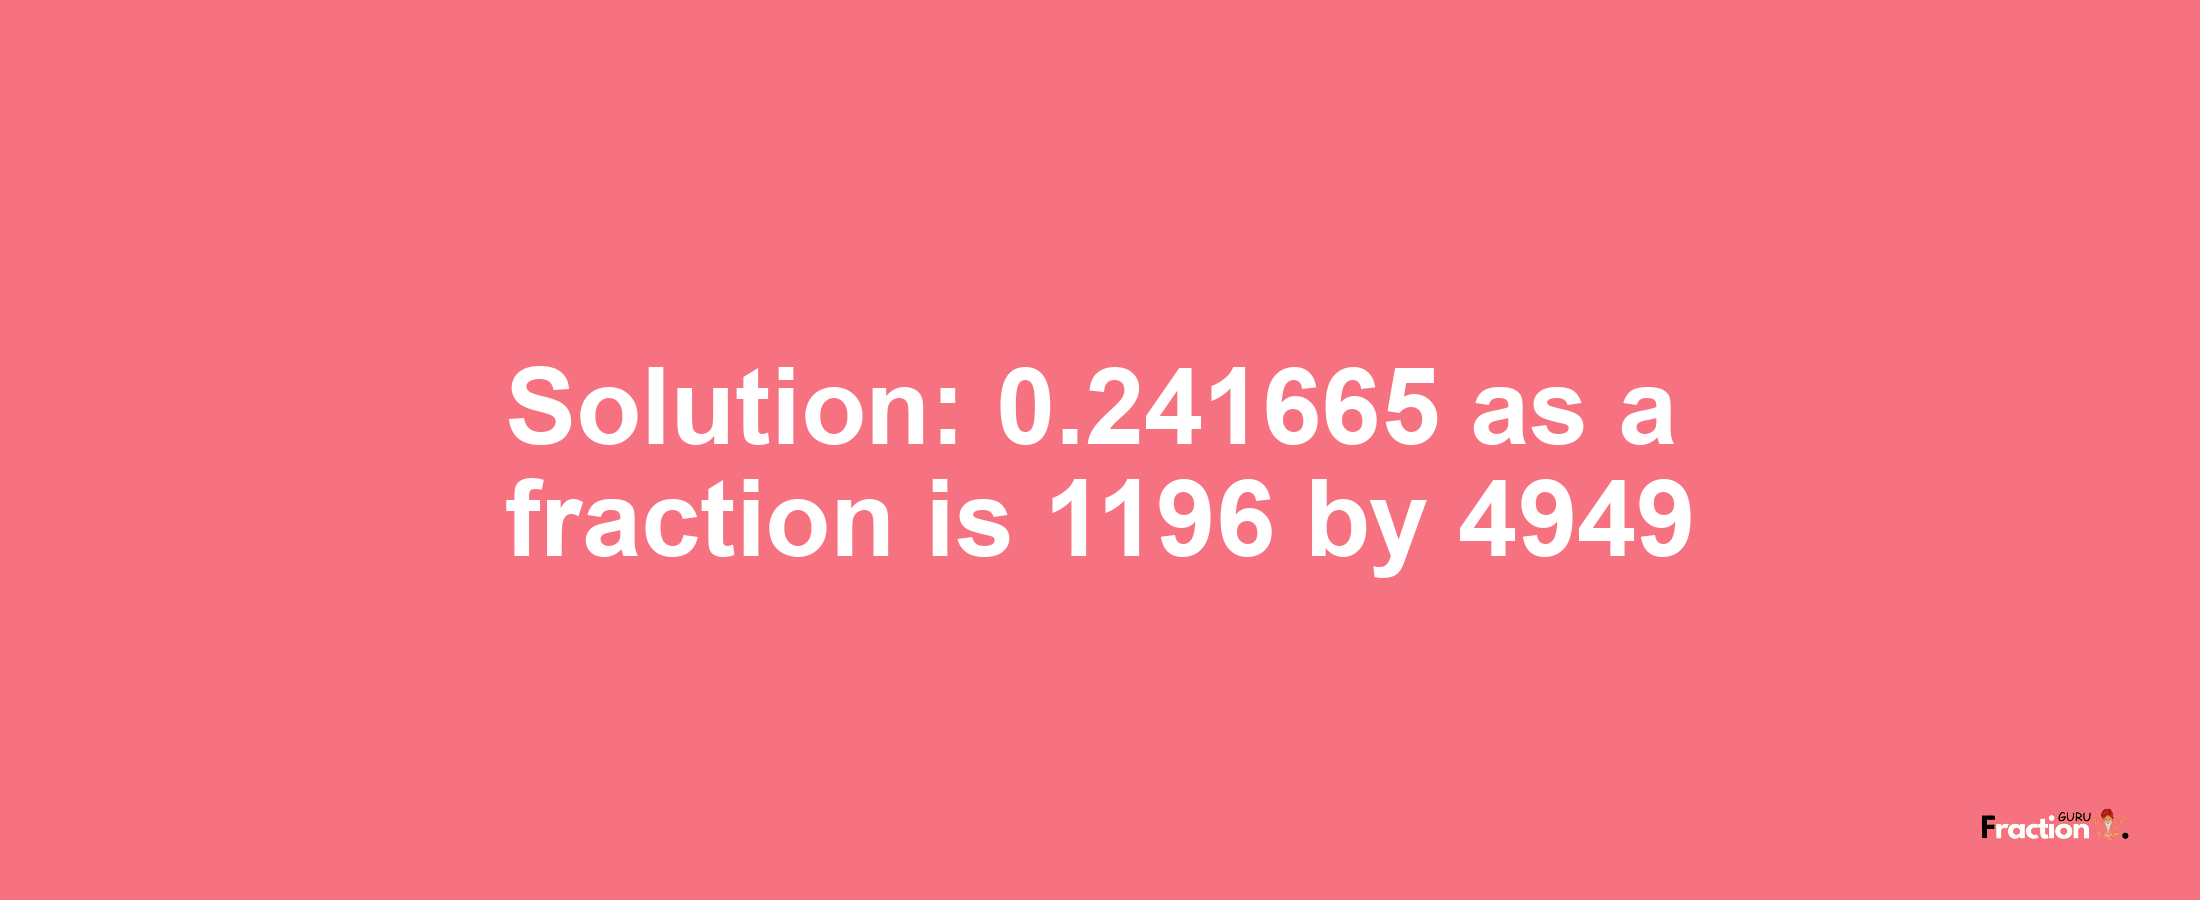 Solution:0.241665 as a fraction is 1196/4949